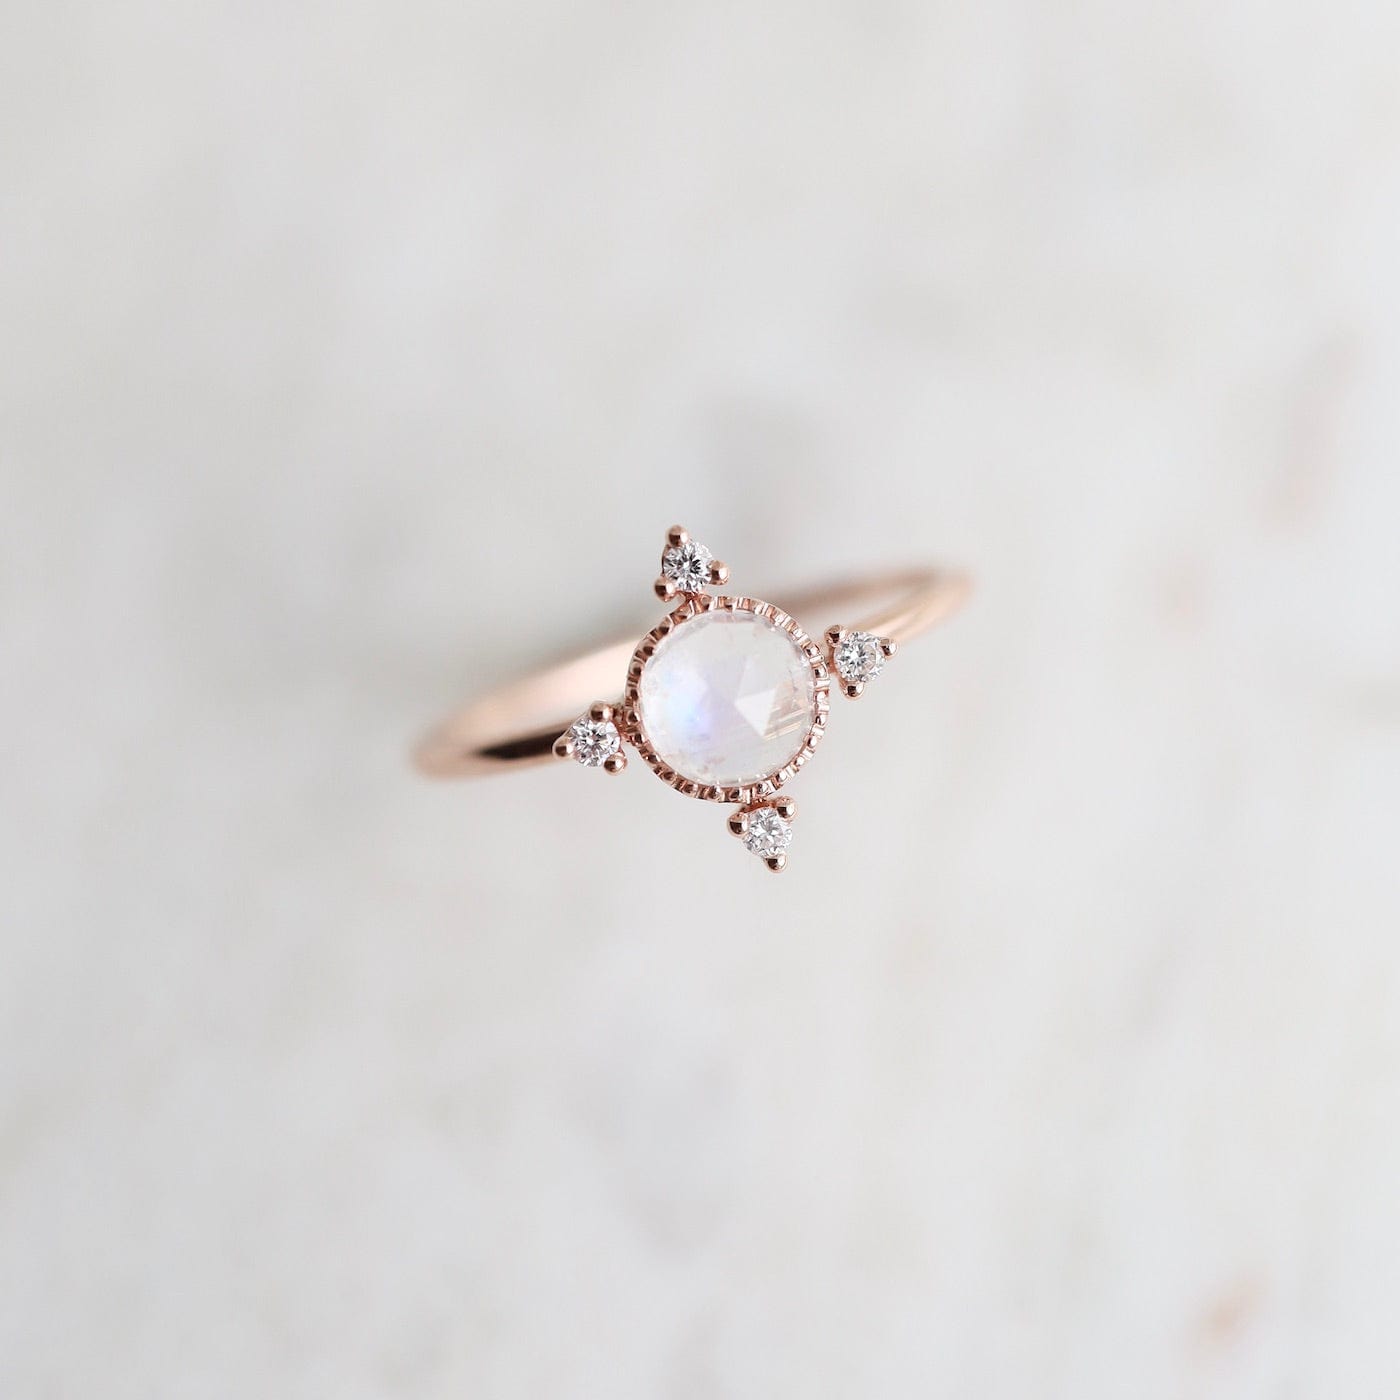 5 Reasons Why a Moonstone Ring is a Great Gift | Discovered